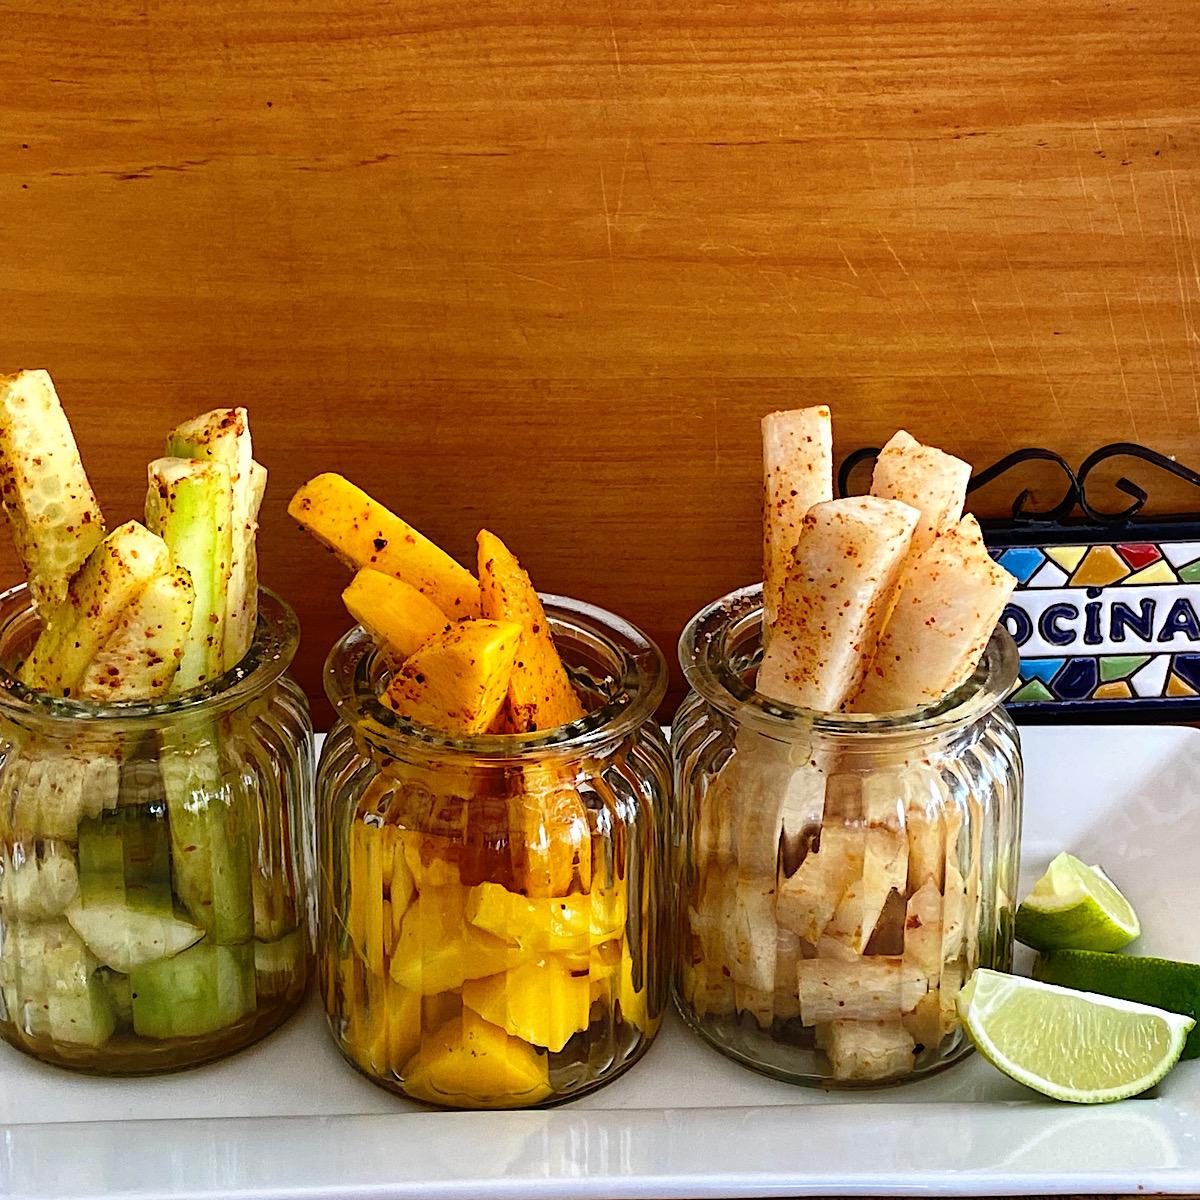 Fruit planks in glass jars sprinkled with chile lime seasoning as Mexican street food